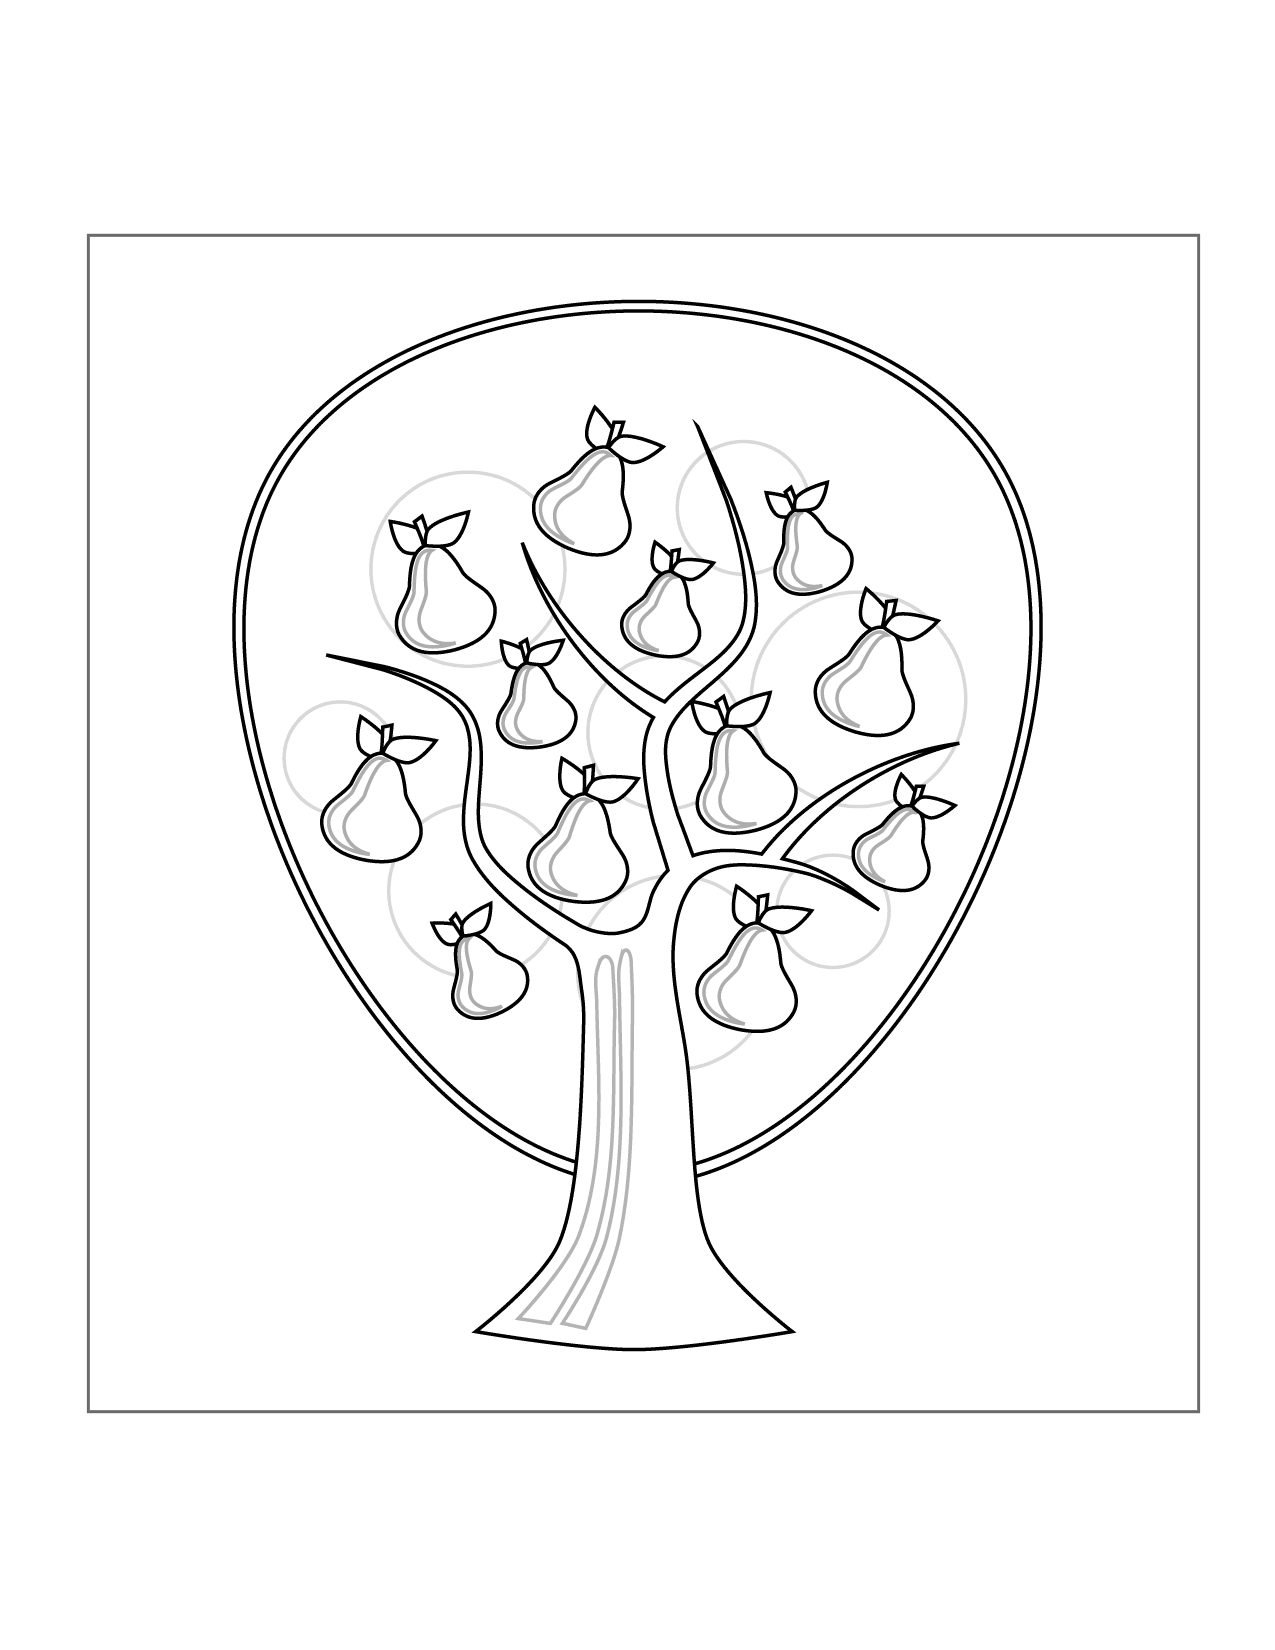 Pear Tree Coloring Page